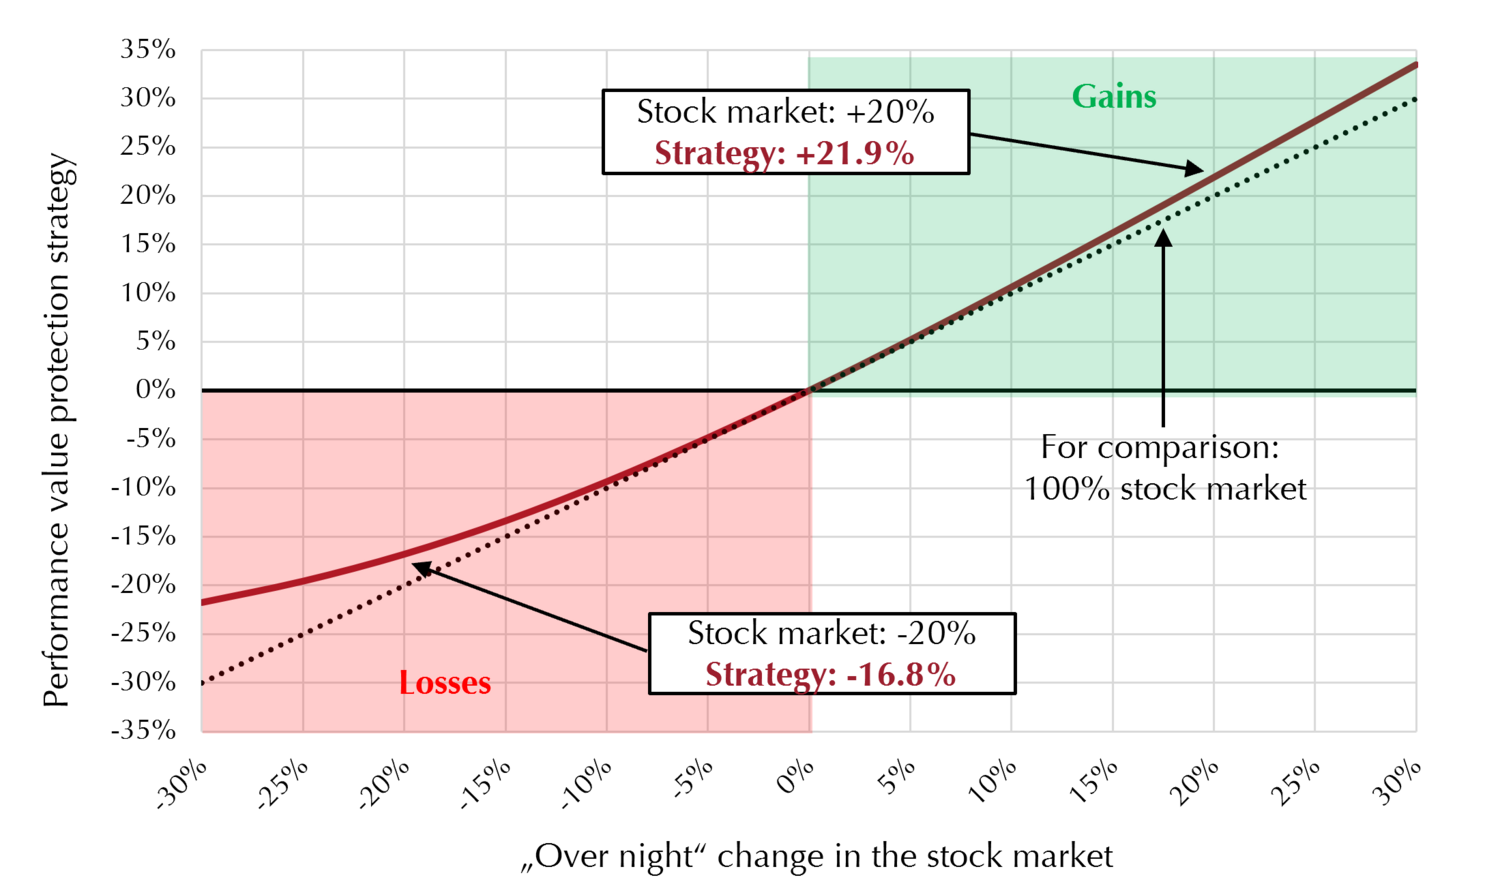 Simulation Overnight Shock at the stock market